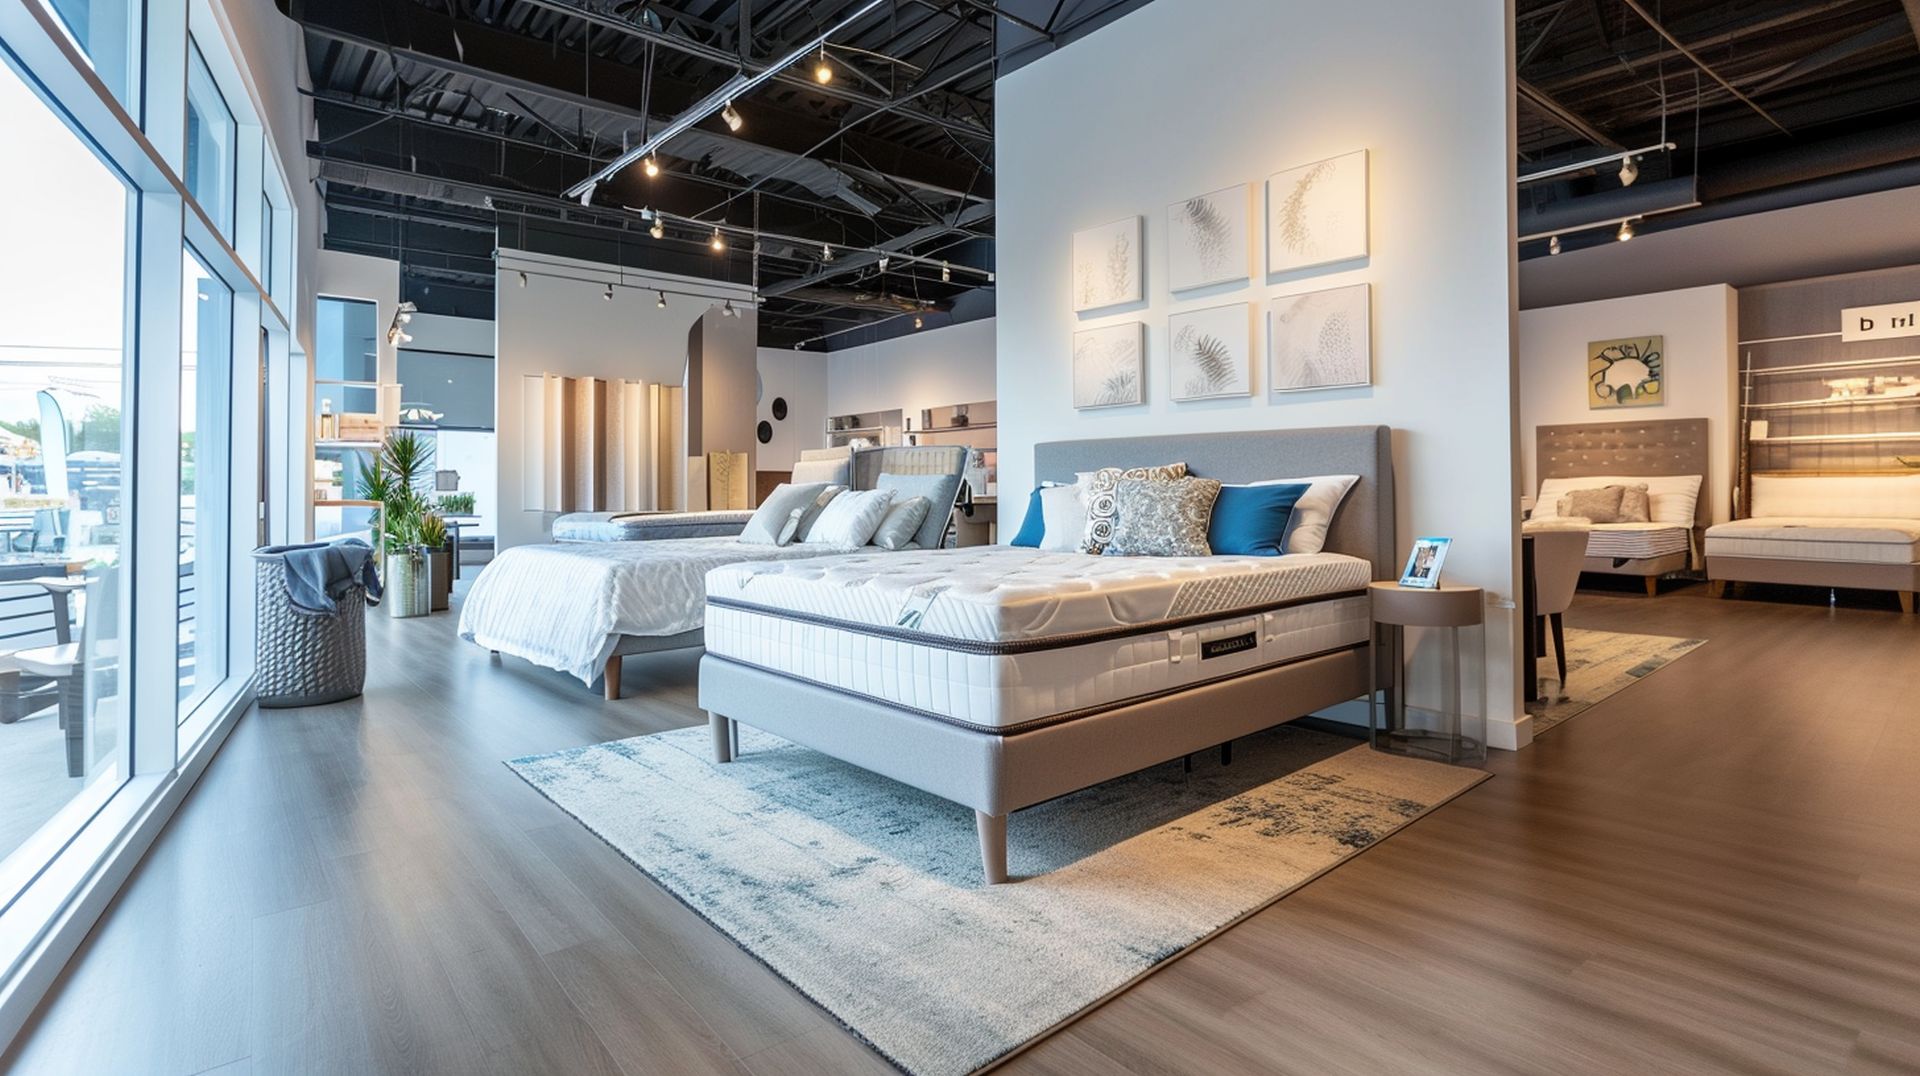 If you're looking for a new bed, mattress stores in Ann Arbor offer the best customer and delivery service, financing, and warranties in Michigan